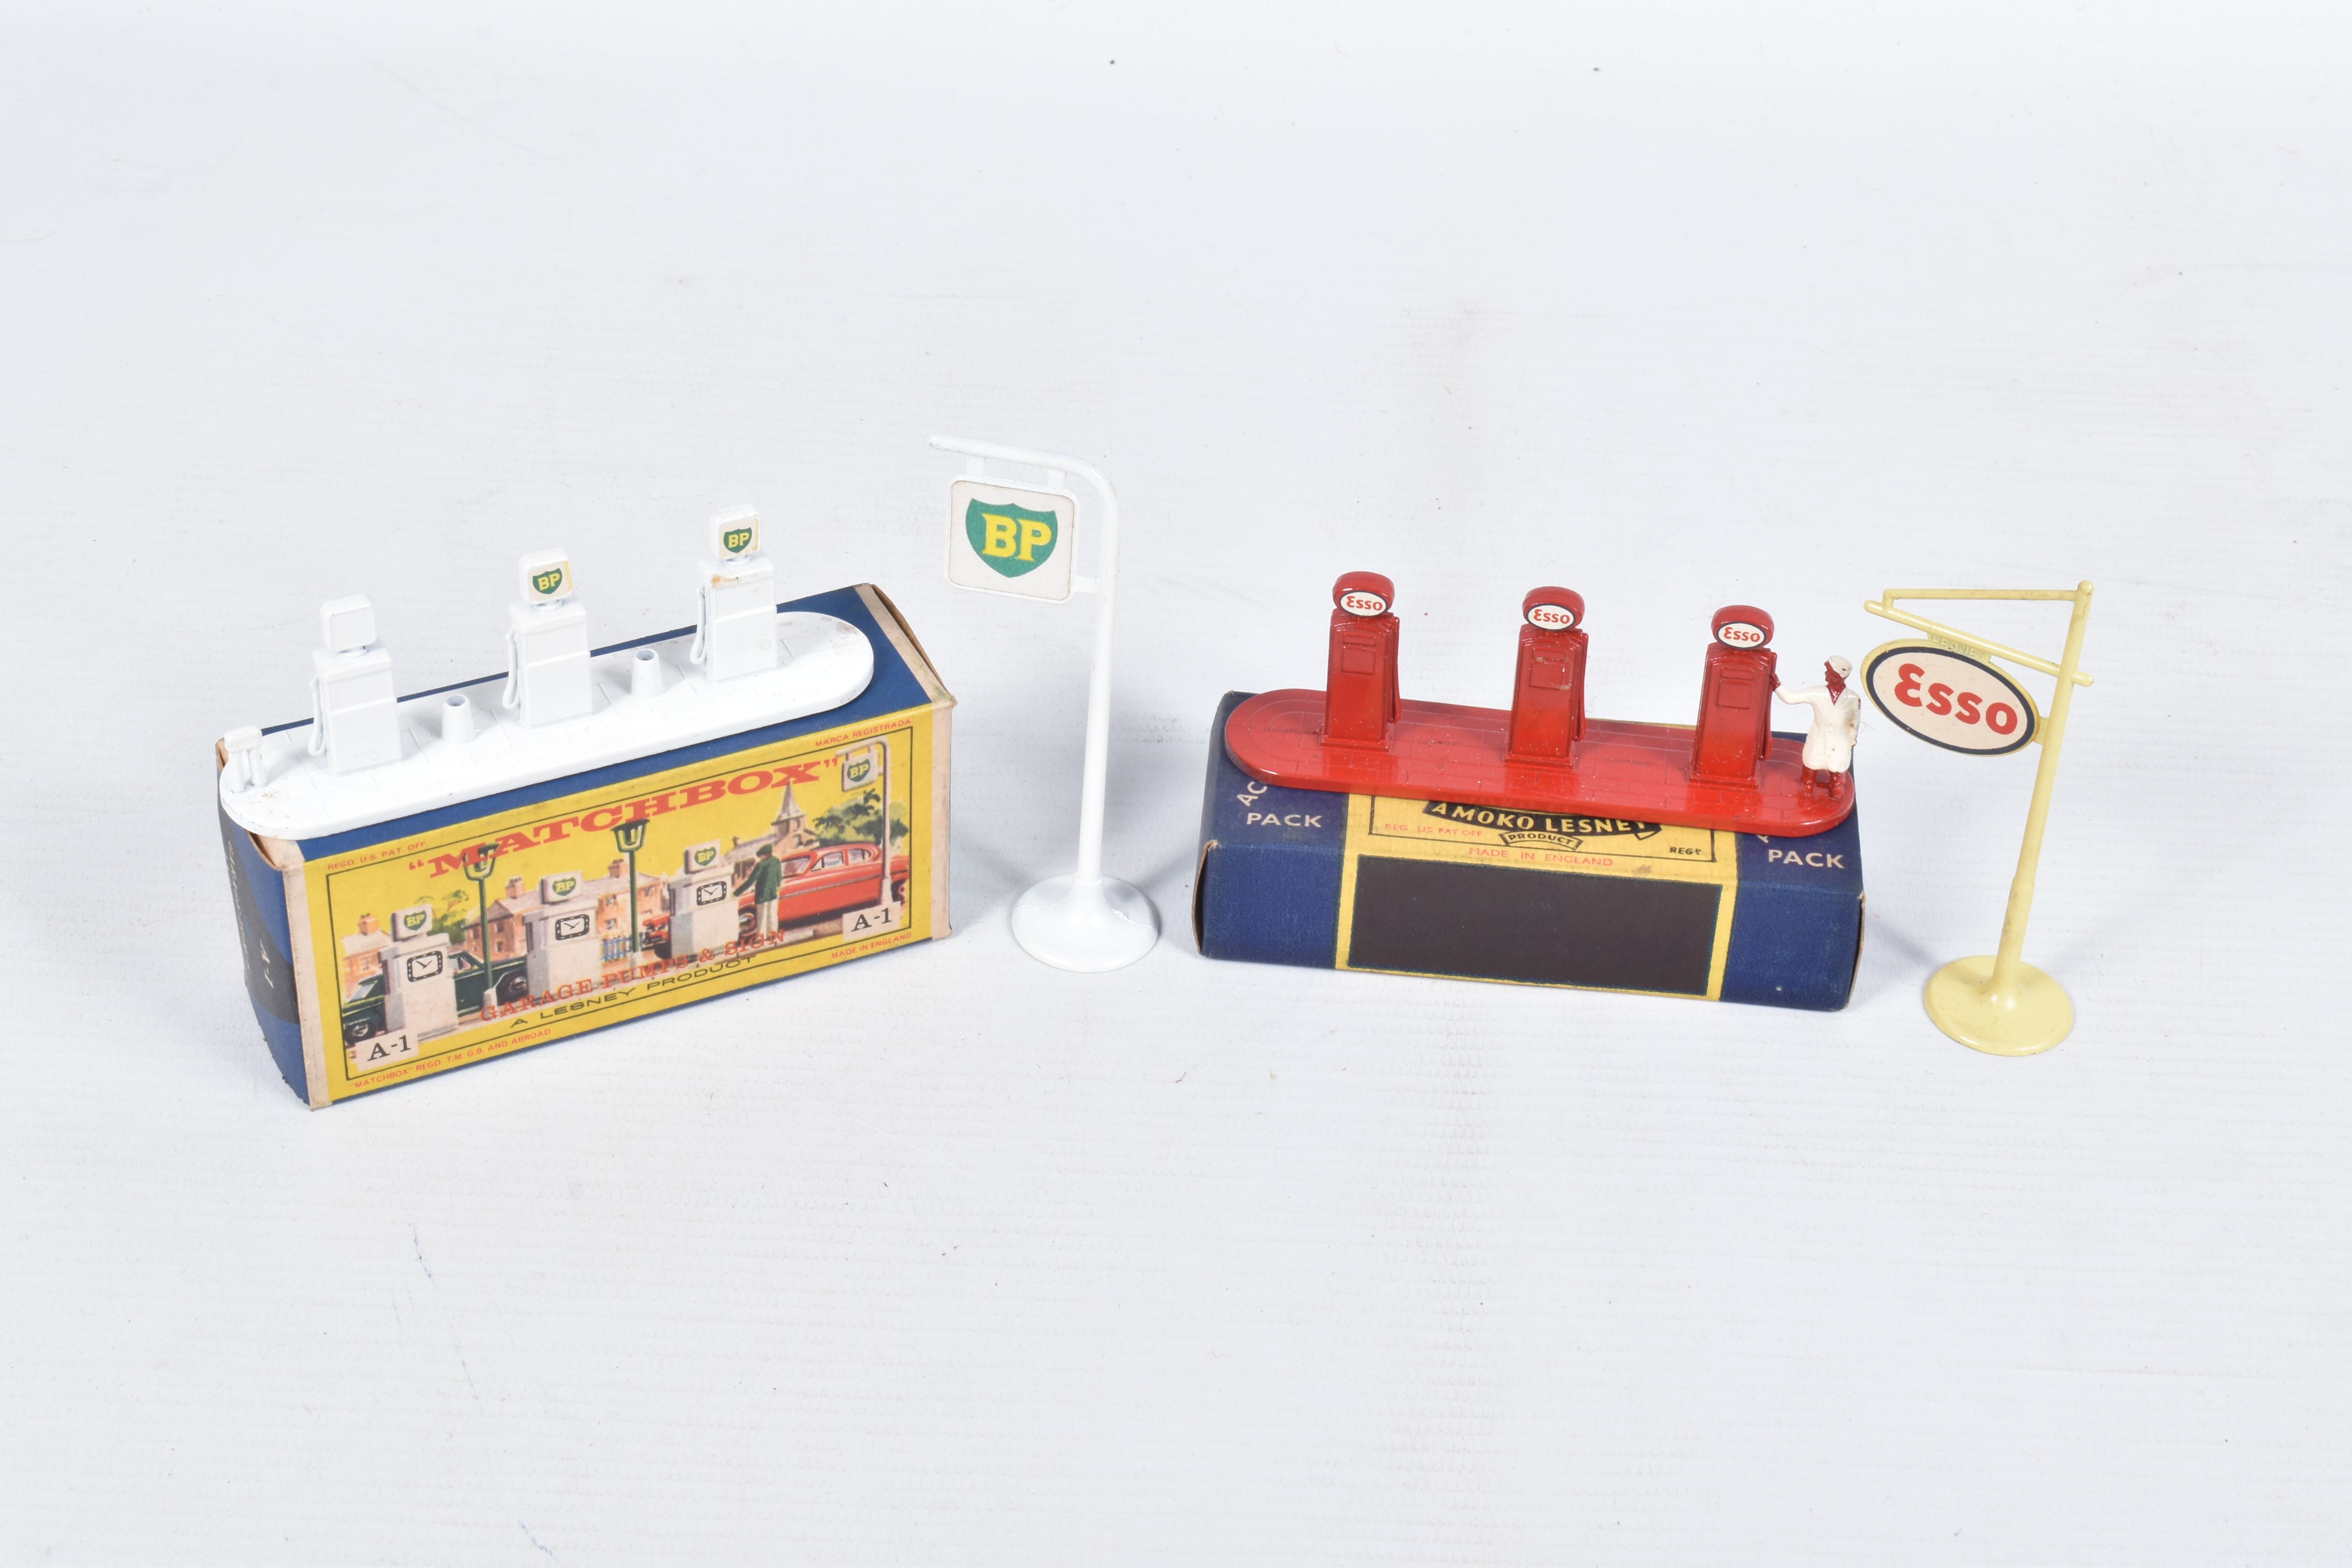 TWO BOXED LESNEY MATCHBOX ACCESSORY PACKS, Esso Petrol Pump set, No.1 and B.P. Garage Pumps and sign